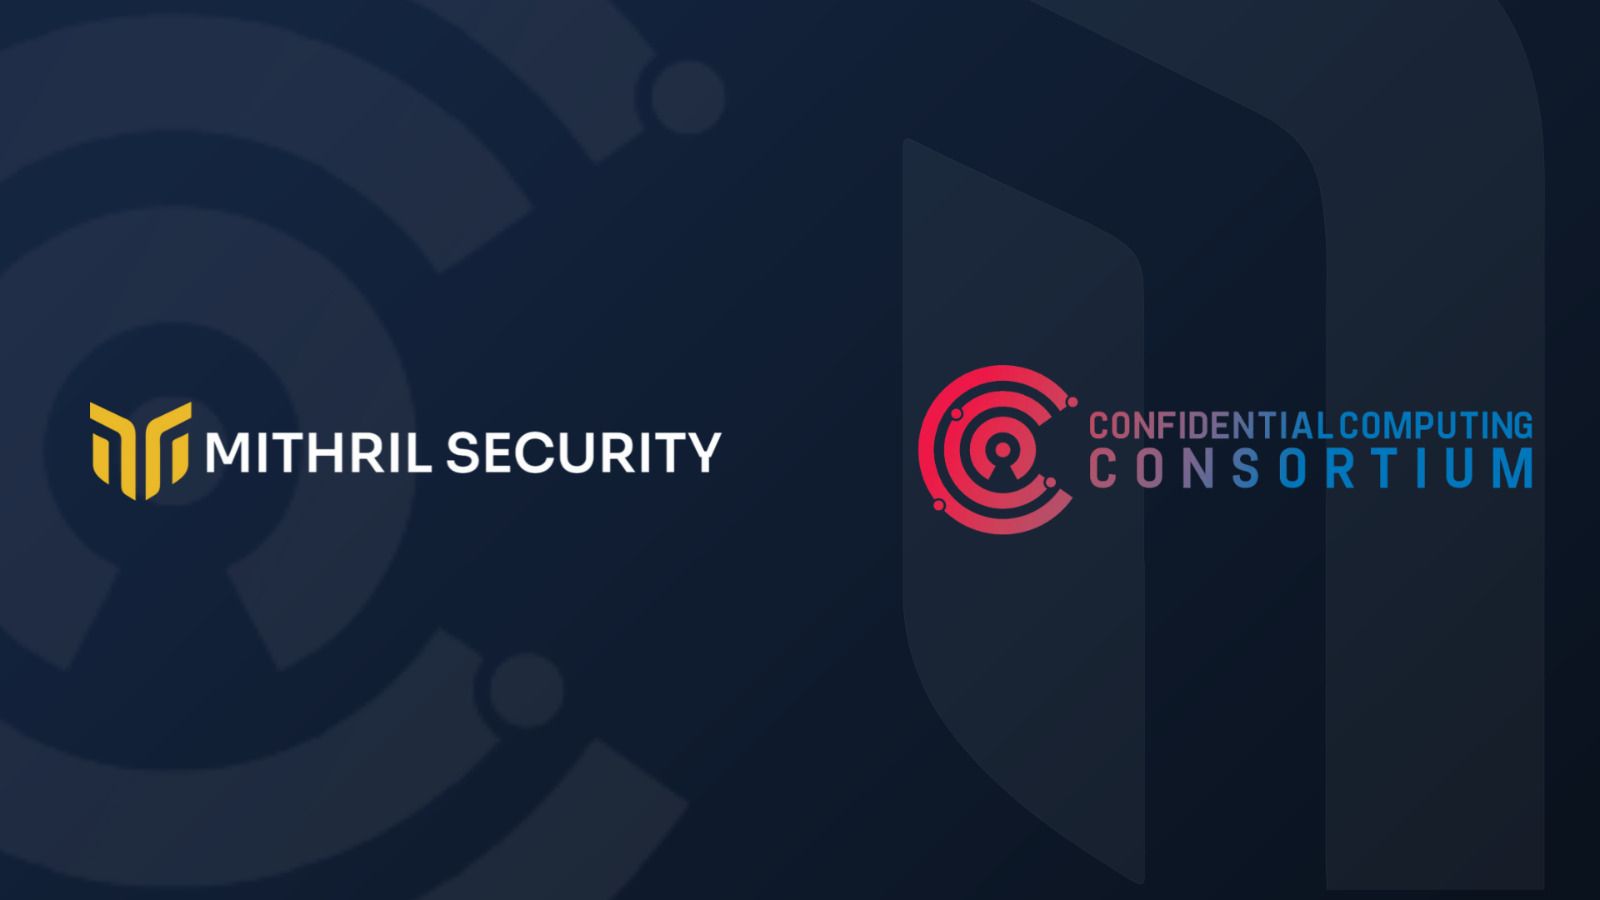 Mithril Security joins the Confidential Computing Consortium